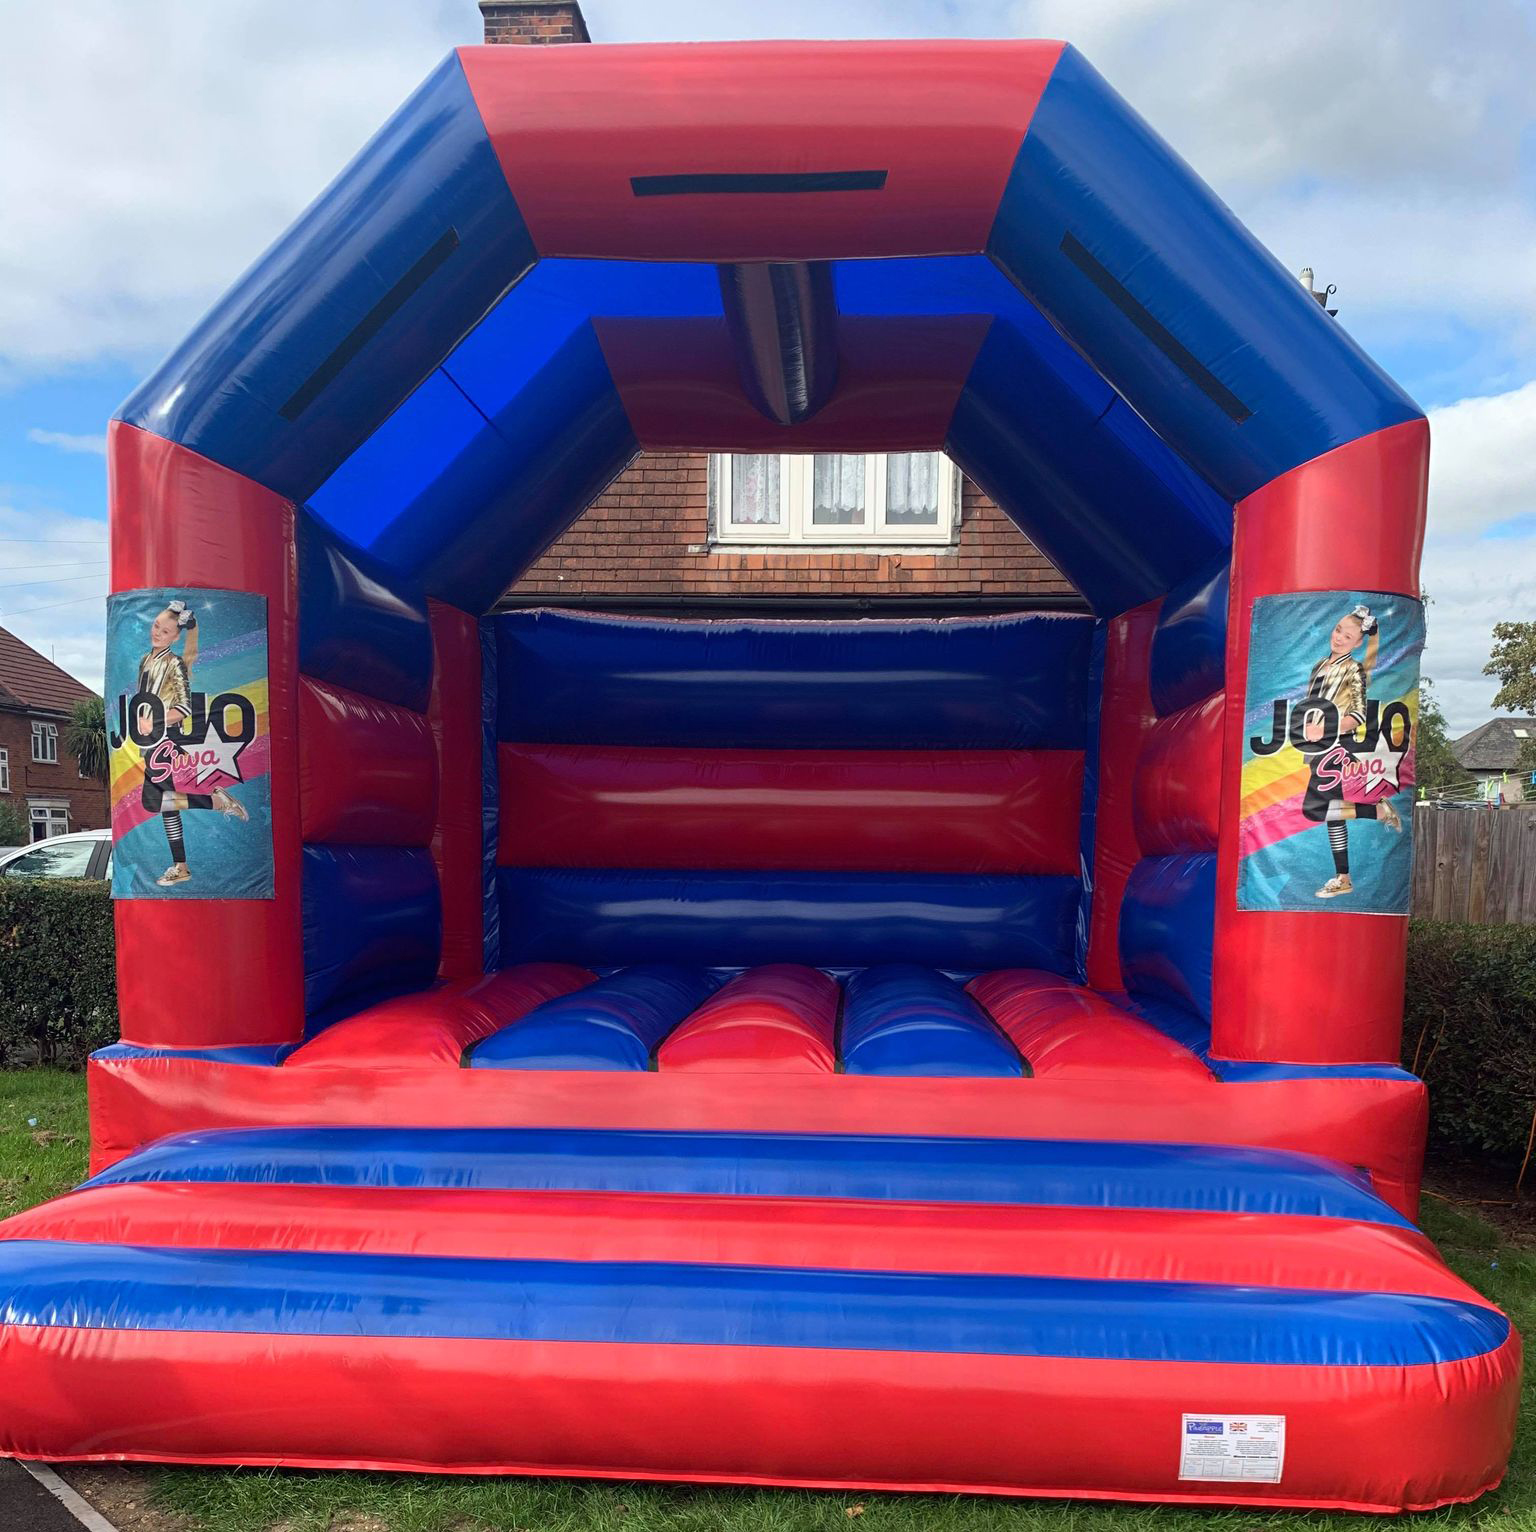 15x15 Adult Jojo Siwa Bouncy Castle Hire Bouncy Castle Hot Tub Slides Photobooth And Soft